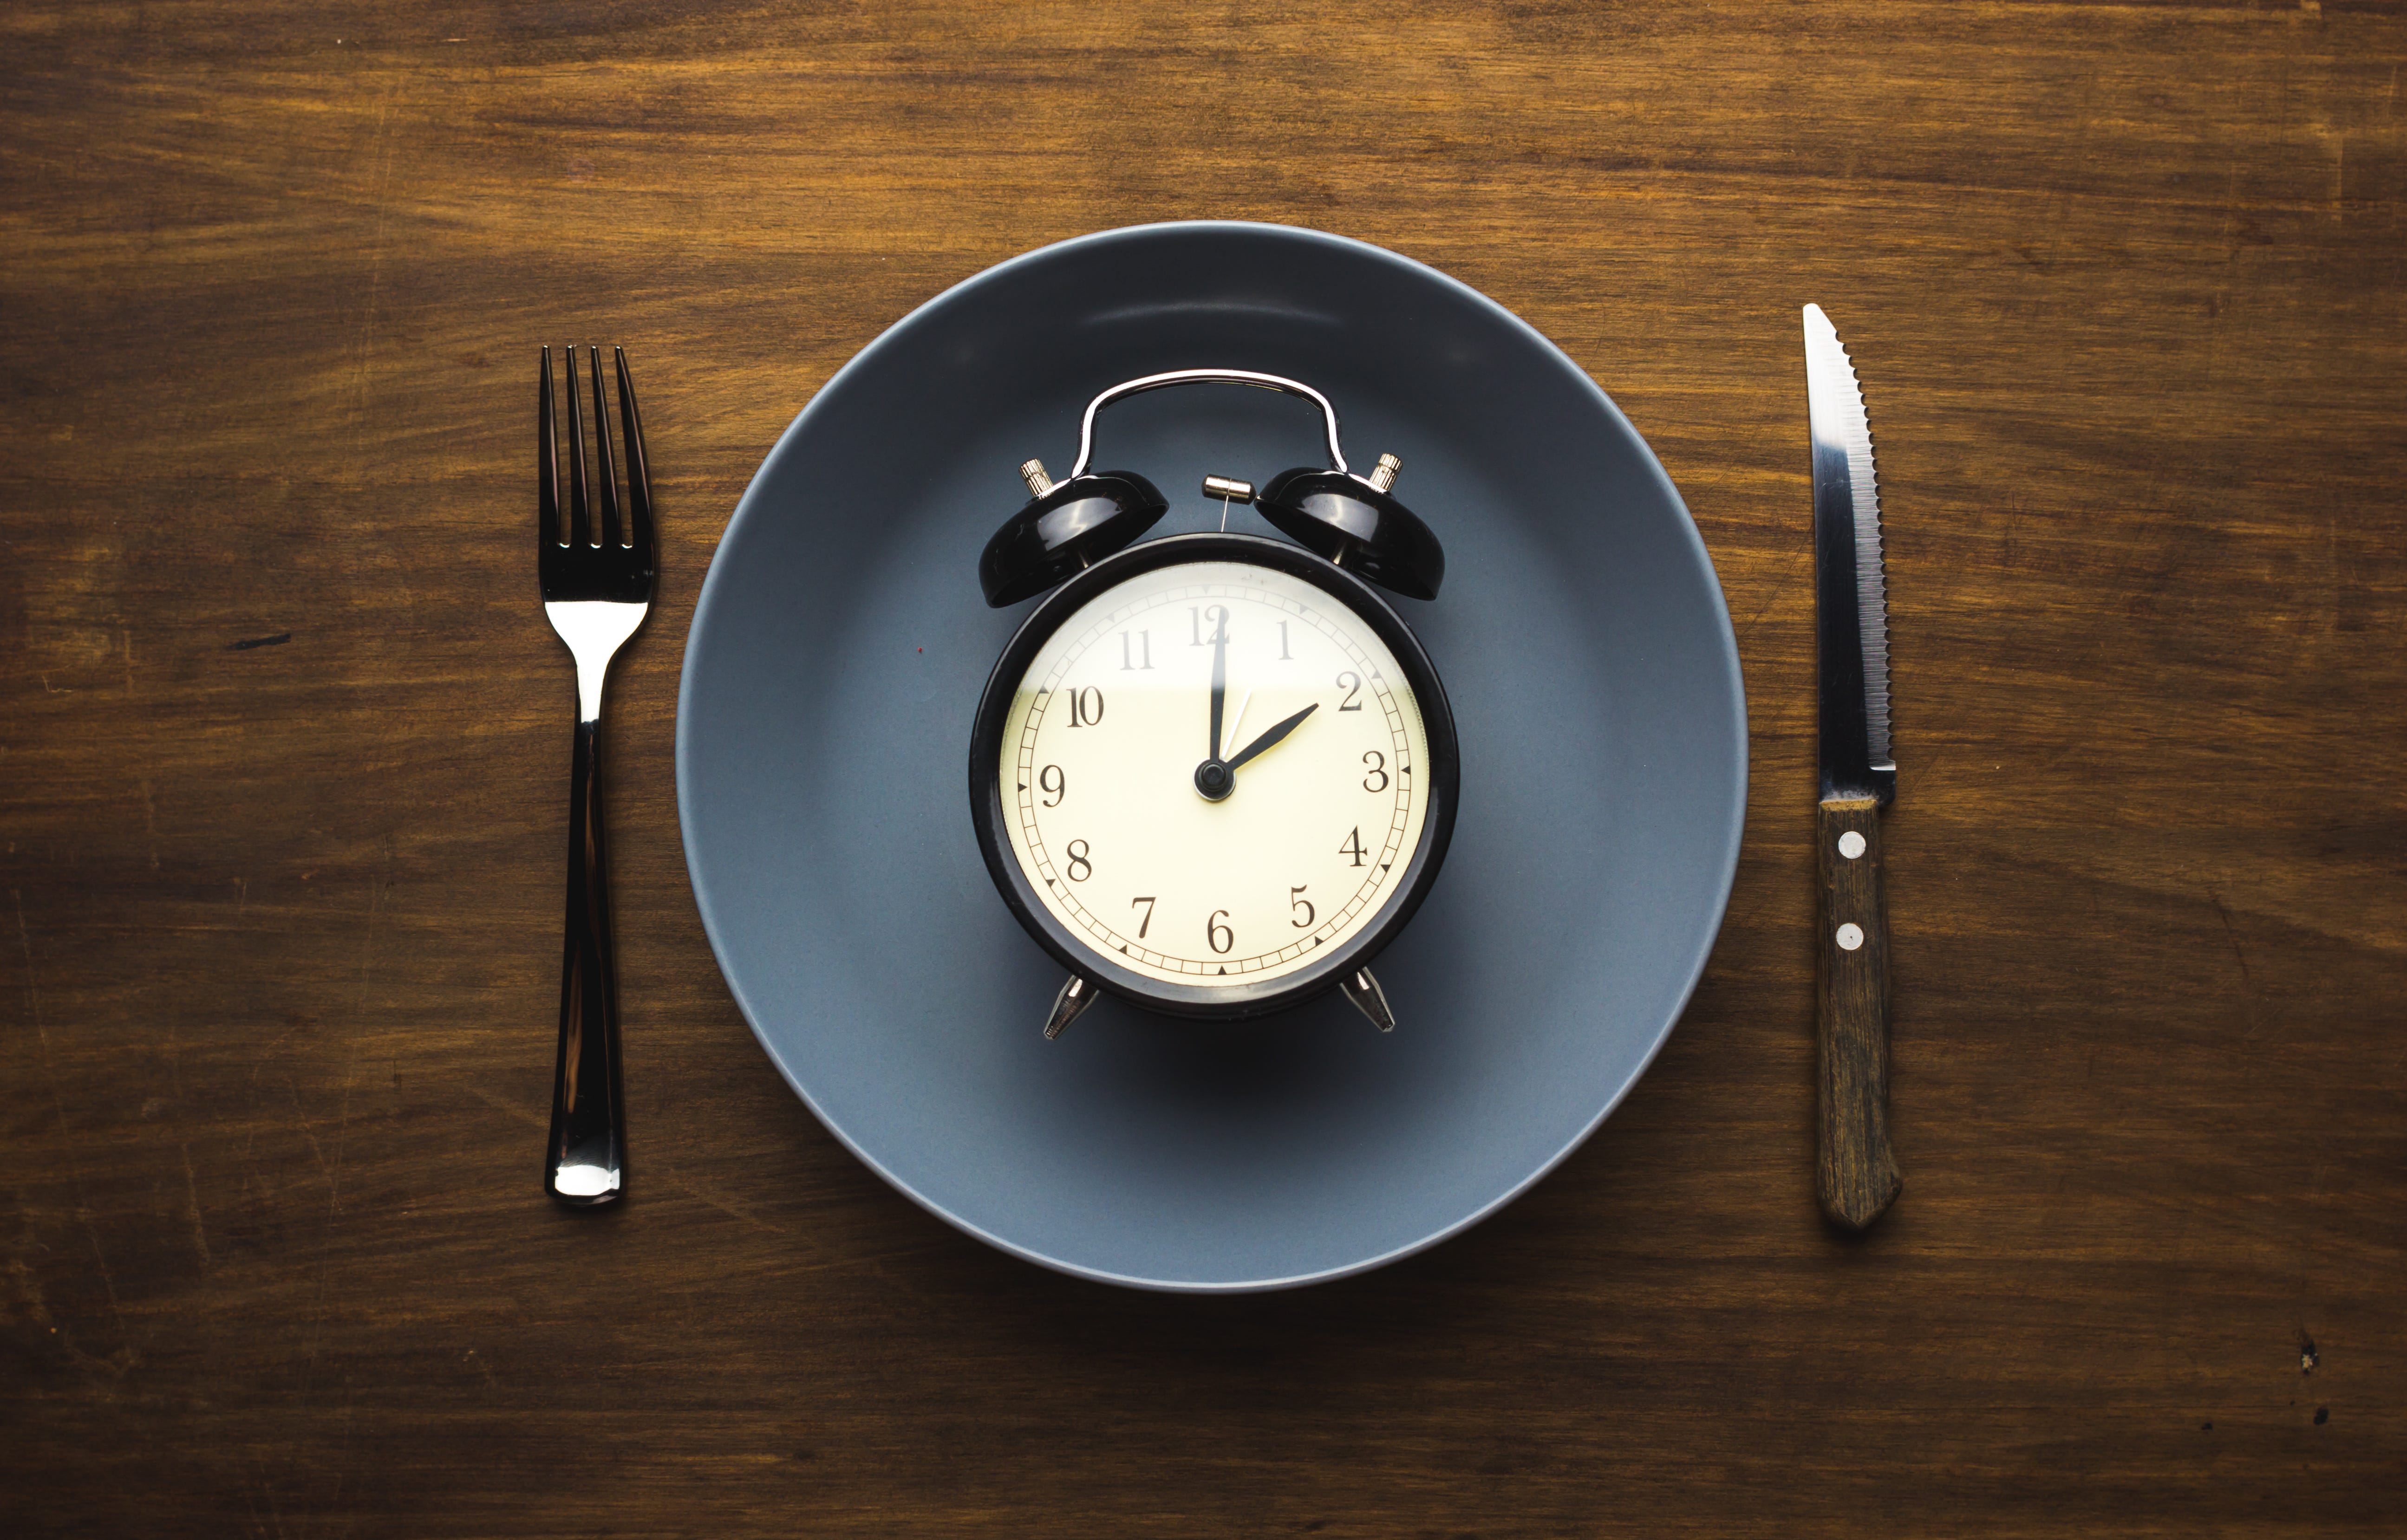 No, Fasting Is Probably Not Healthy